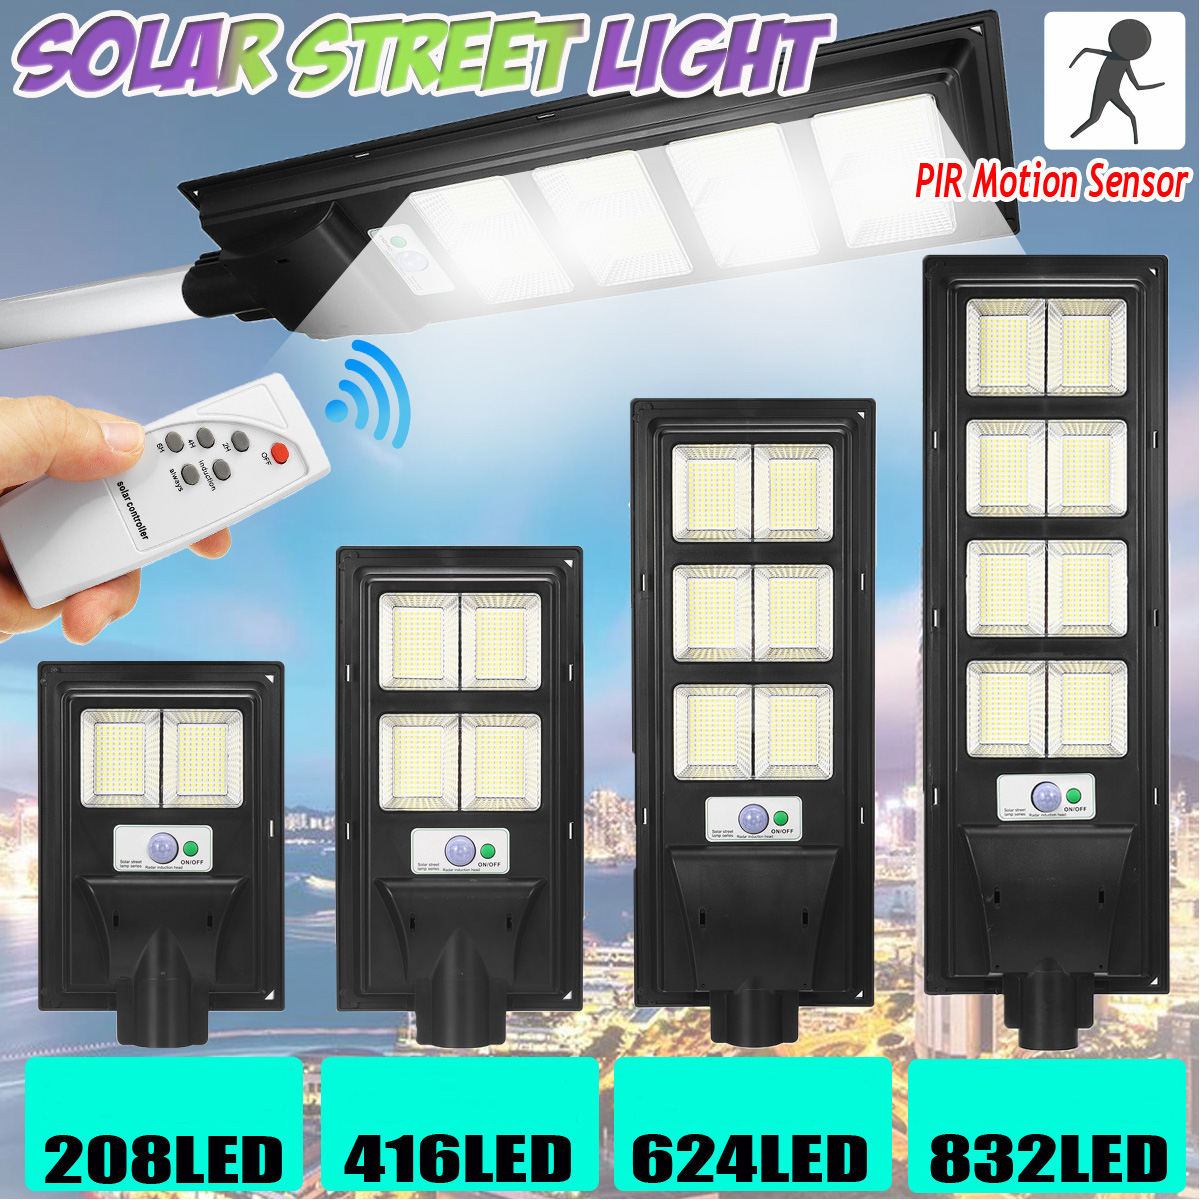 Find 208/416/624/832LED Solar Powered Wall Street Light PIR Motion Sensor Dimmable Lamp + Remote Control for Sale on Gipsybee.com with cryptocurrencies